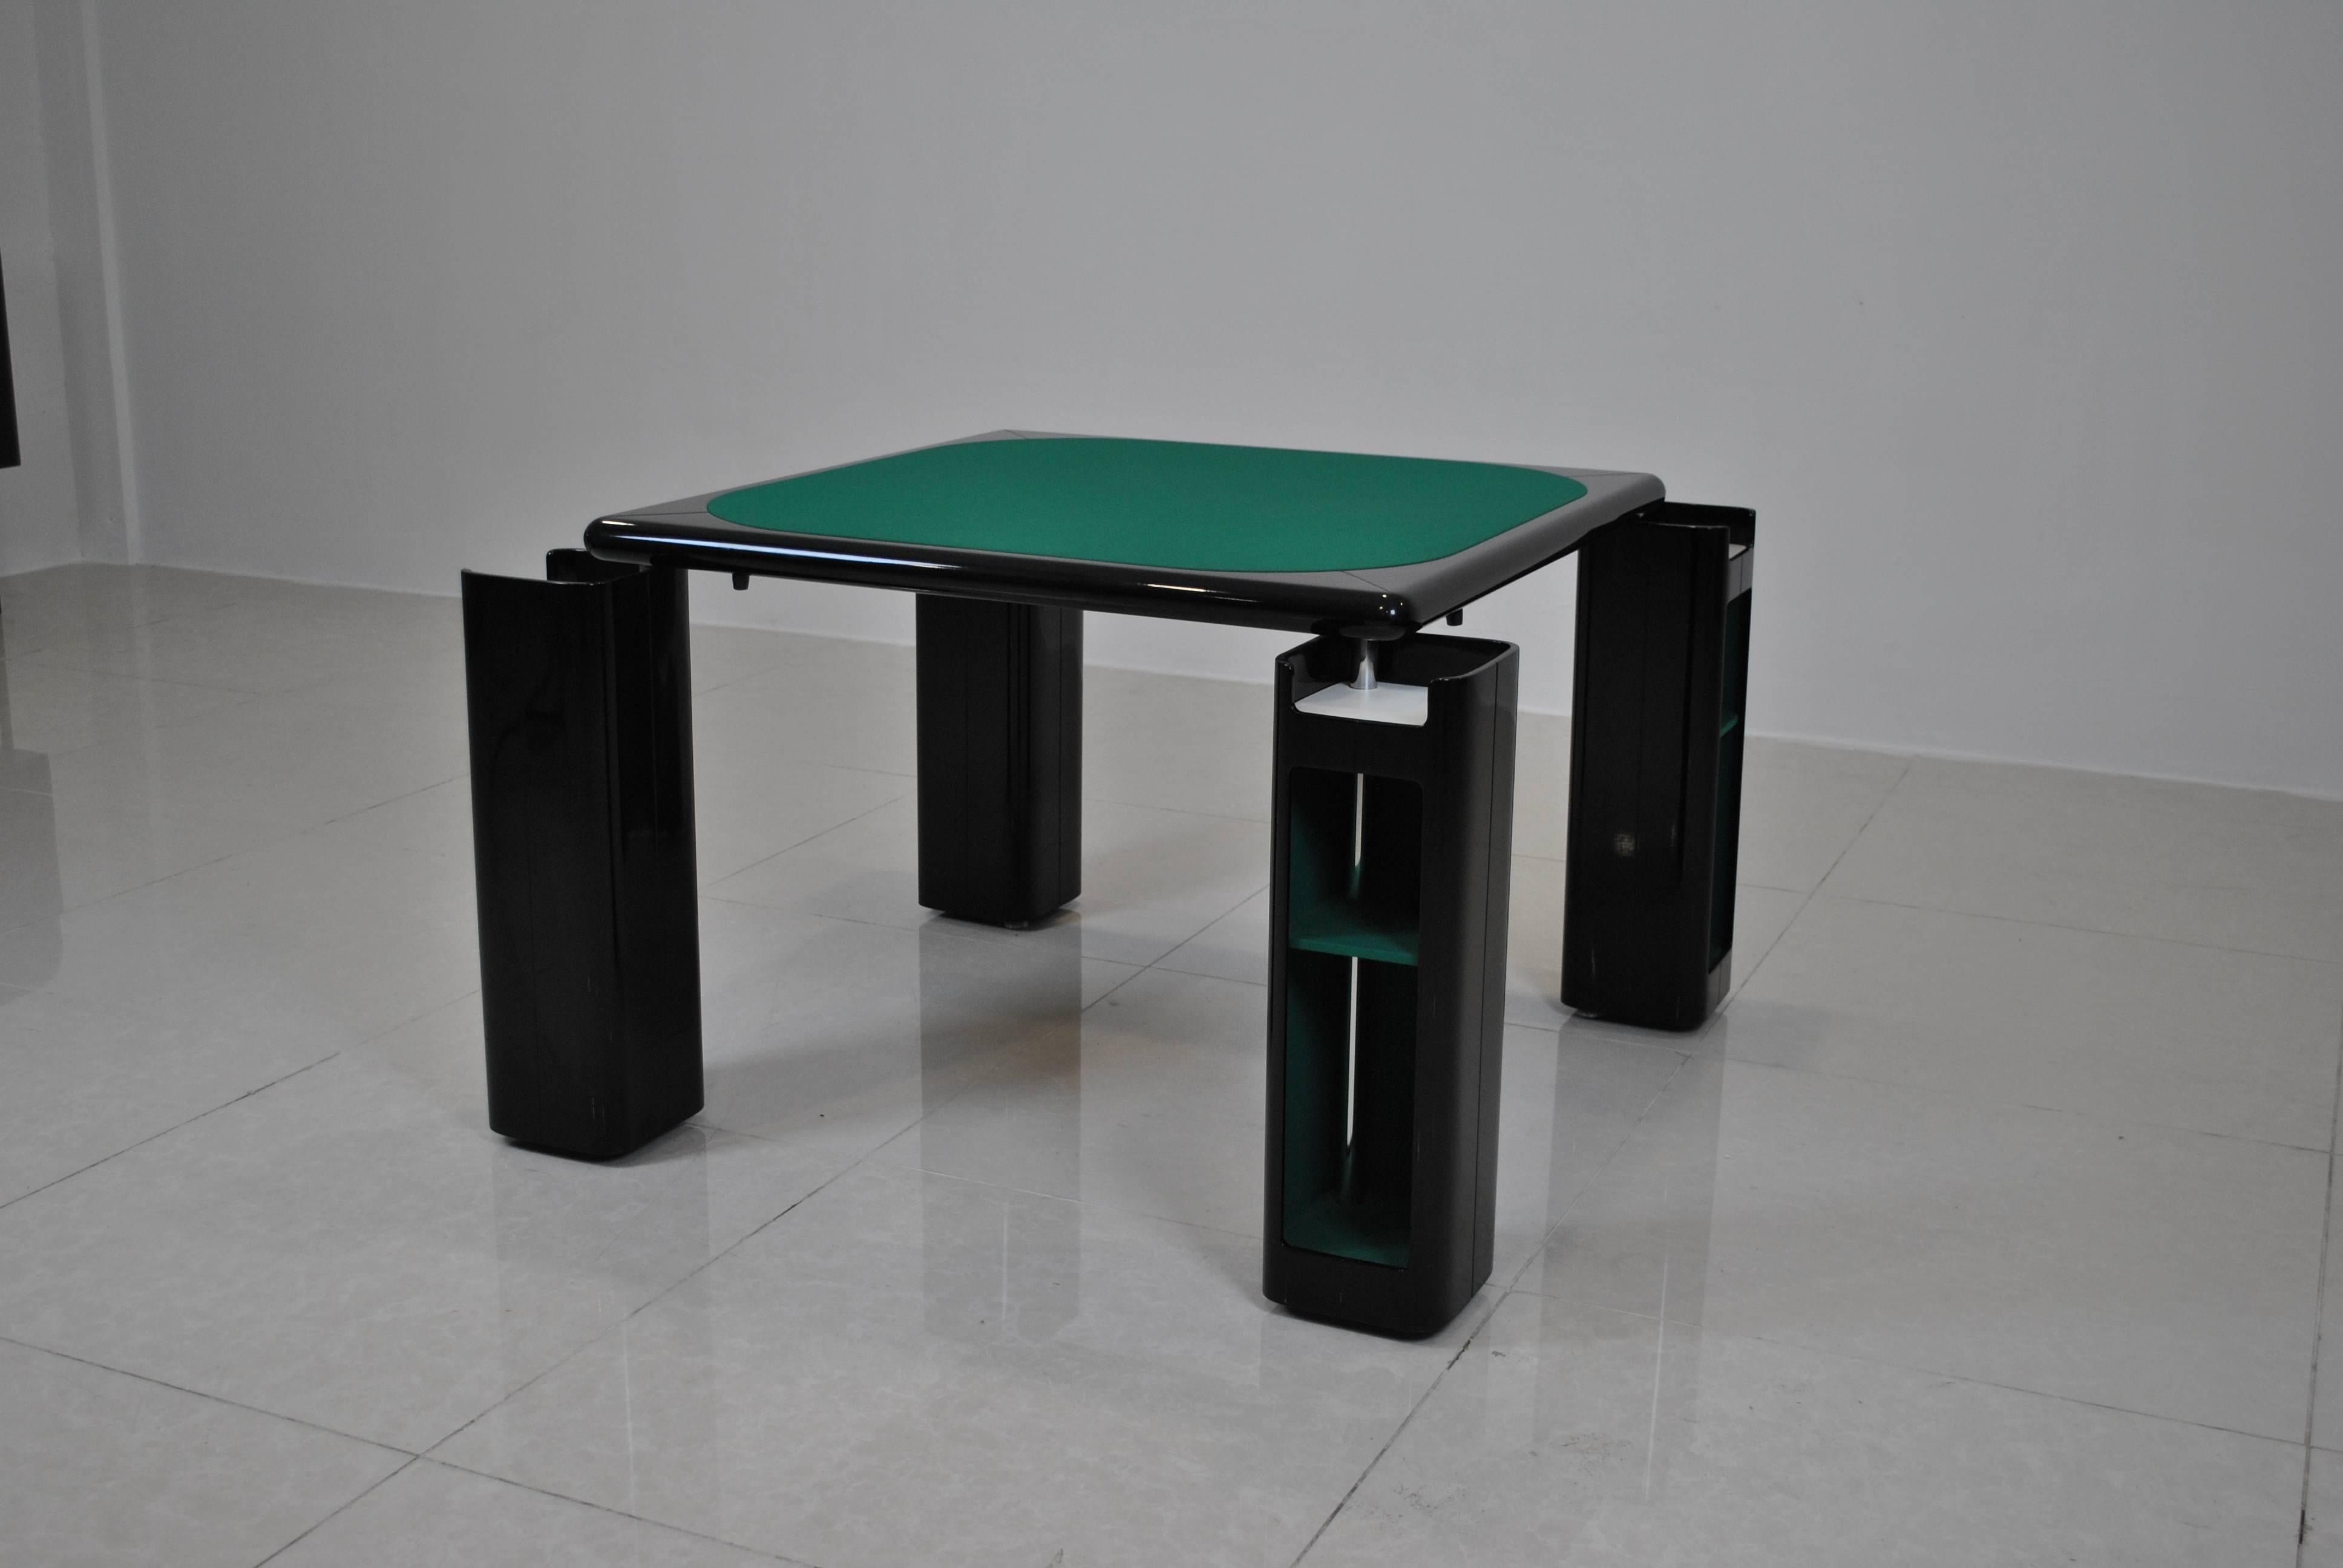 A rare and very good condition card table by Pierluigi Molinari and edited by Pozzi Milano. The table dates for the early 1970s and is stylisticly near to pieces by Joe Colombo who also worked for Pozzi.

The table is in very good vintage